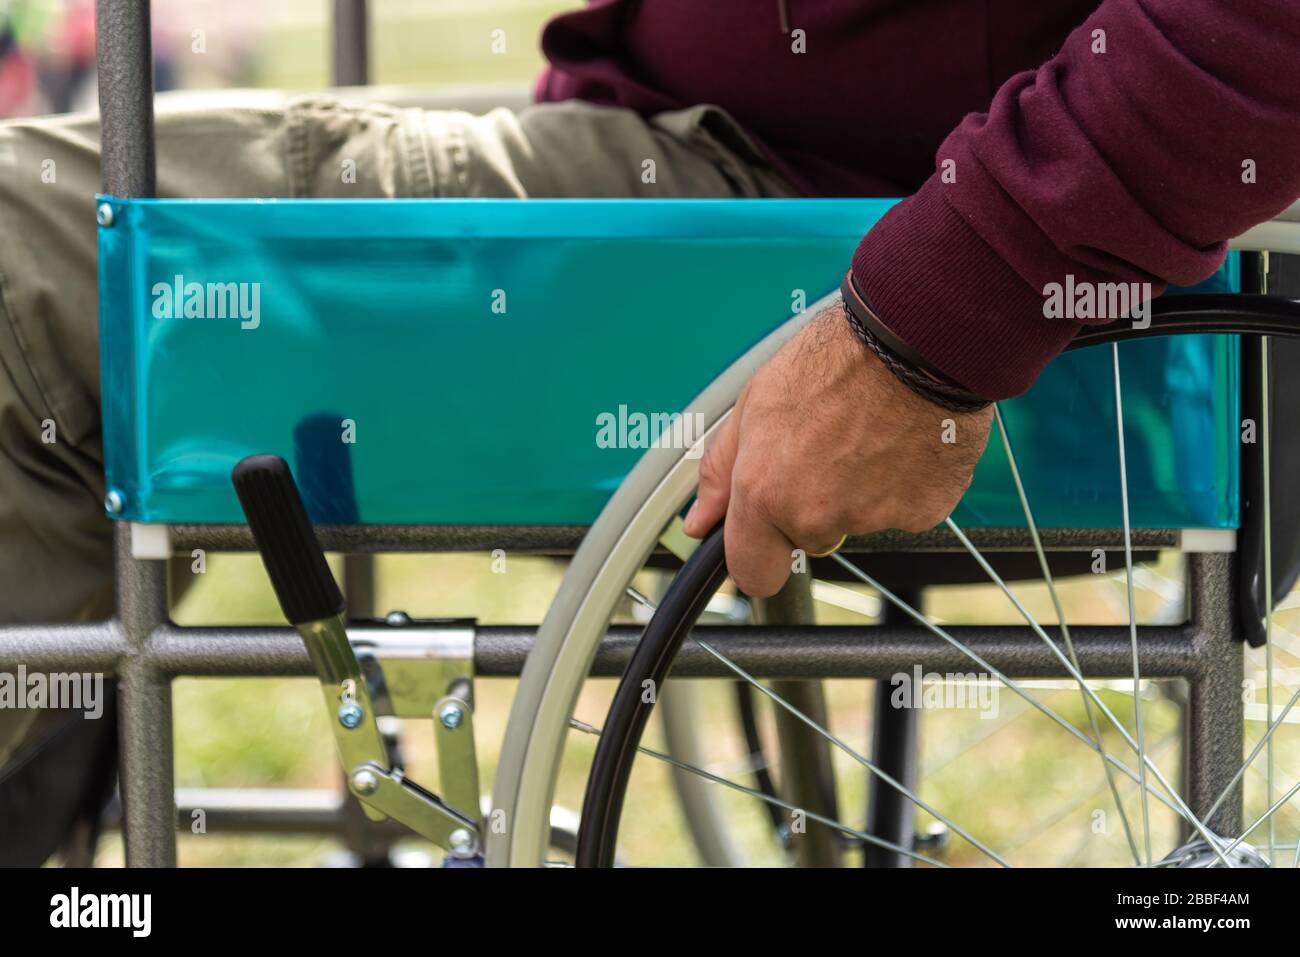 Hand of a paralyzed adult man in a wheelchair wearing a dark red sweatshirt in a park Stock Photo